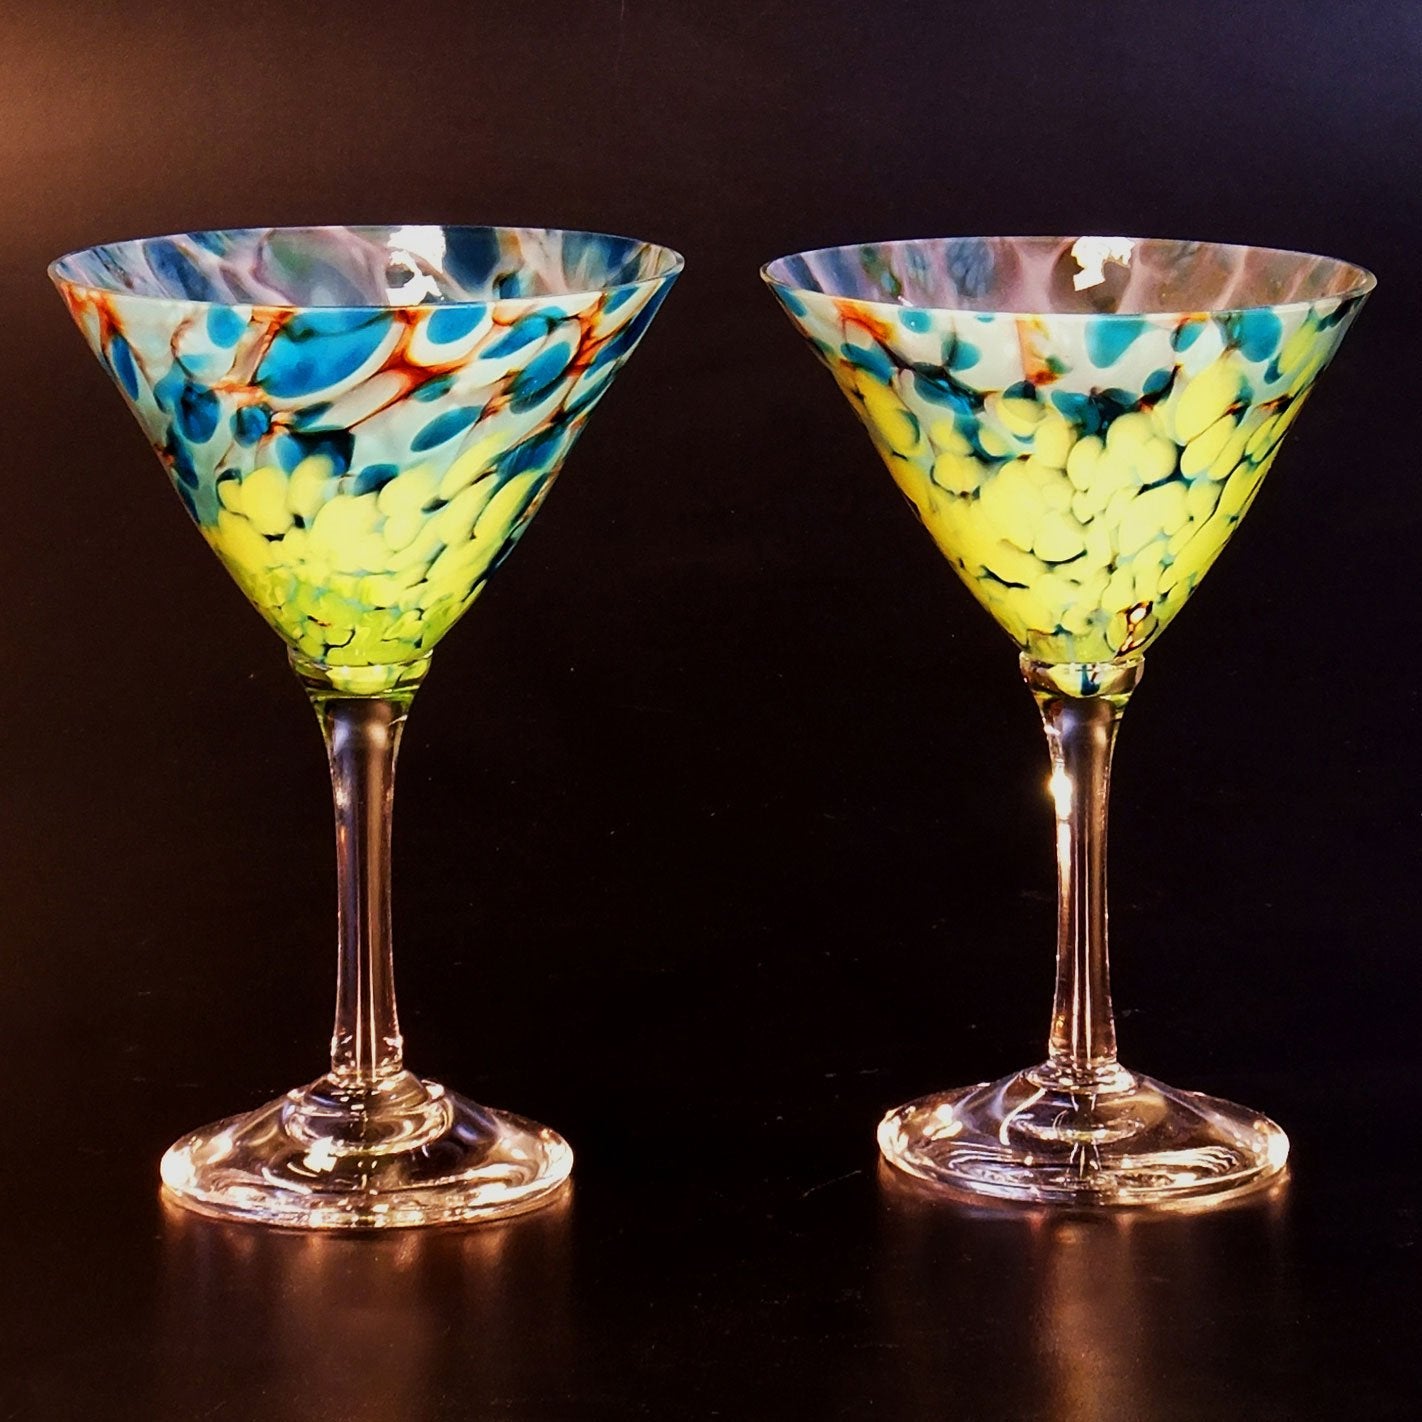 https://www.sweetheartgallery.com/cdn/shop/products/The-Glass-Forge-Martini-Glasses-Shown-In-ET-Crater-Artistic-Functional-Artisan-Handblown-Art-Glass-Barware-Drinkware.jpg?v=1521556689